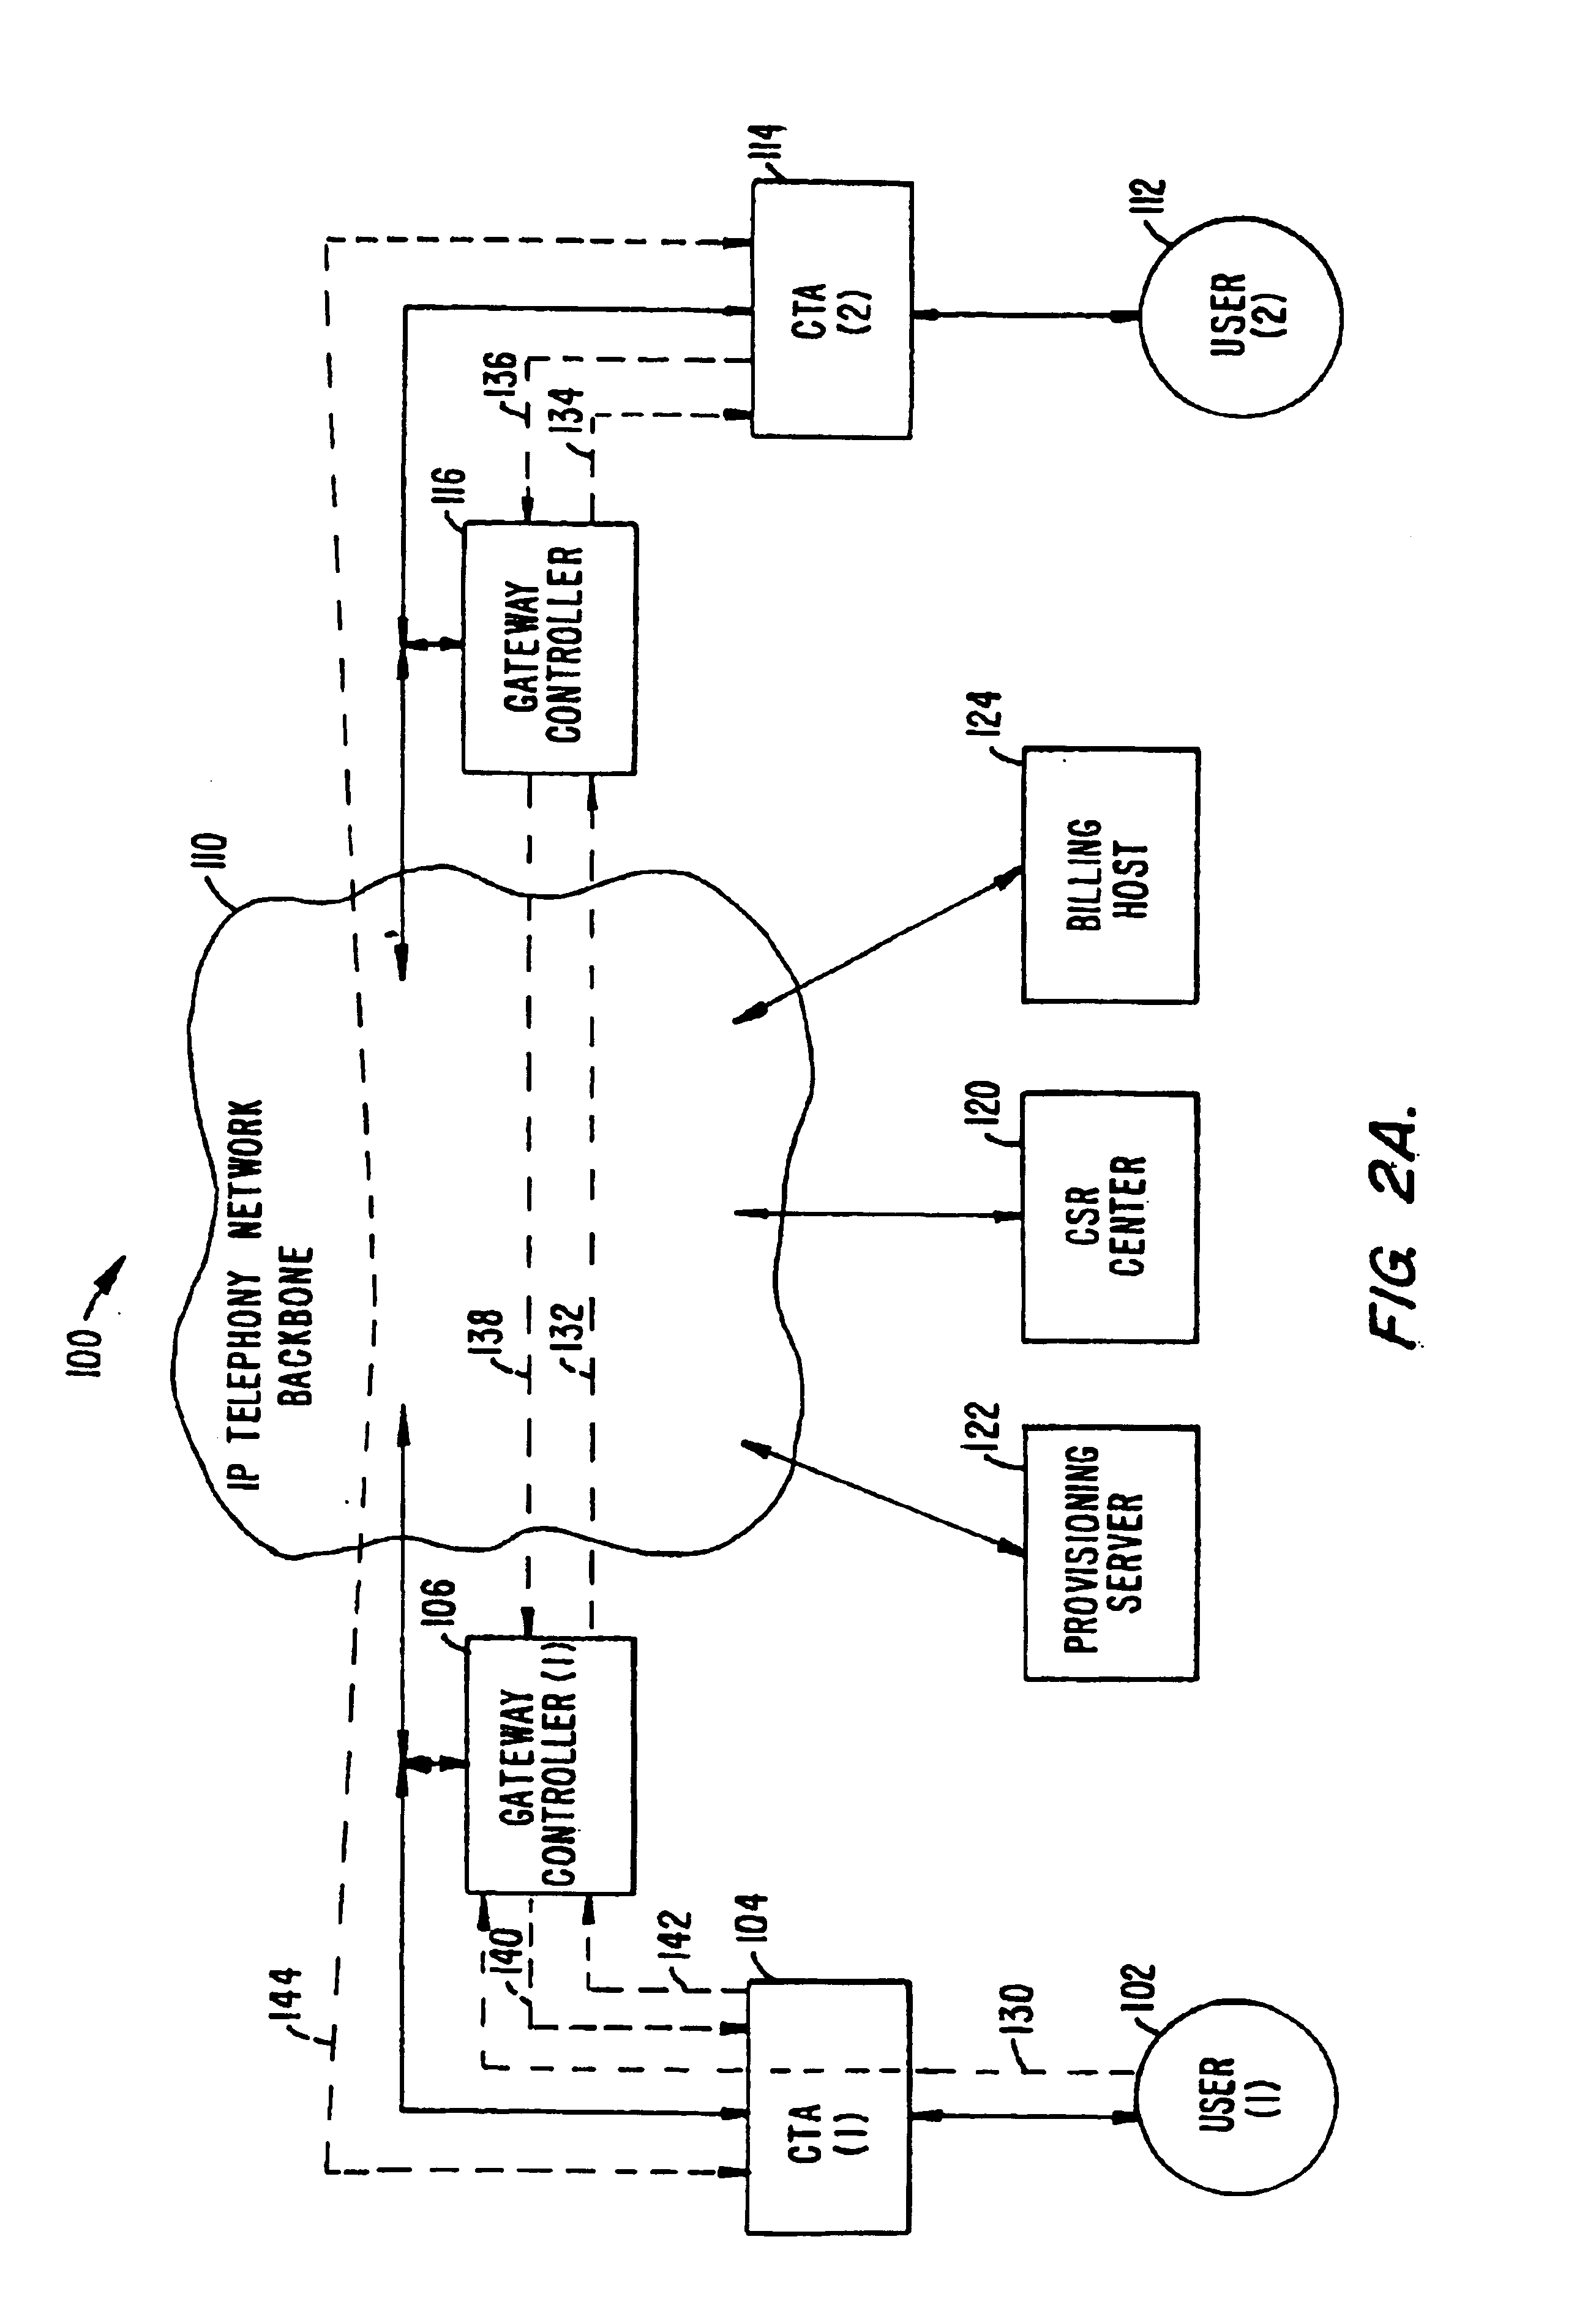 Self-generation of certificates using secure microprocessor in a device for transferring digital information